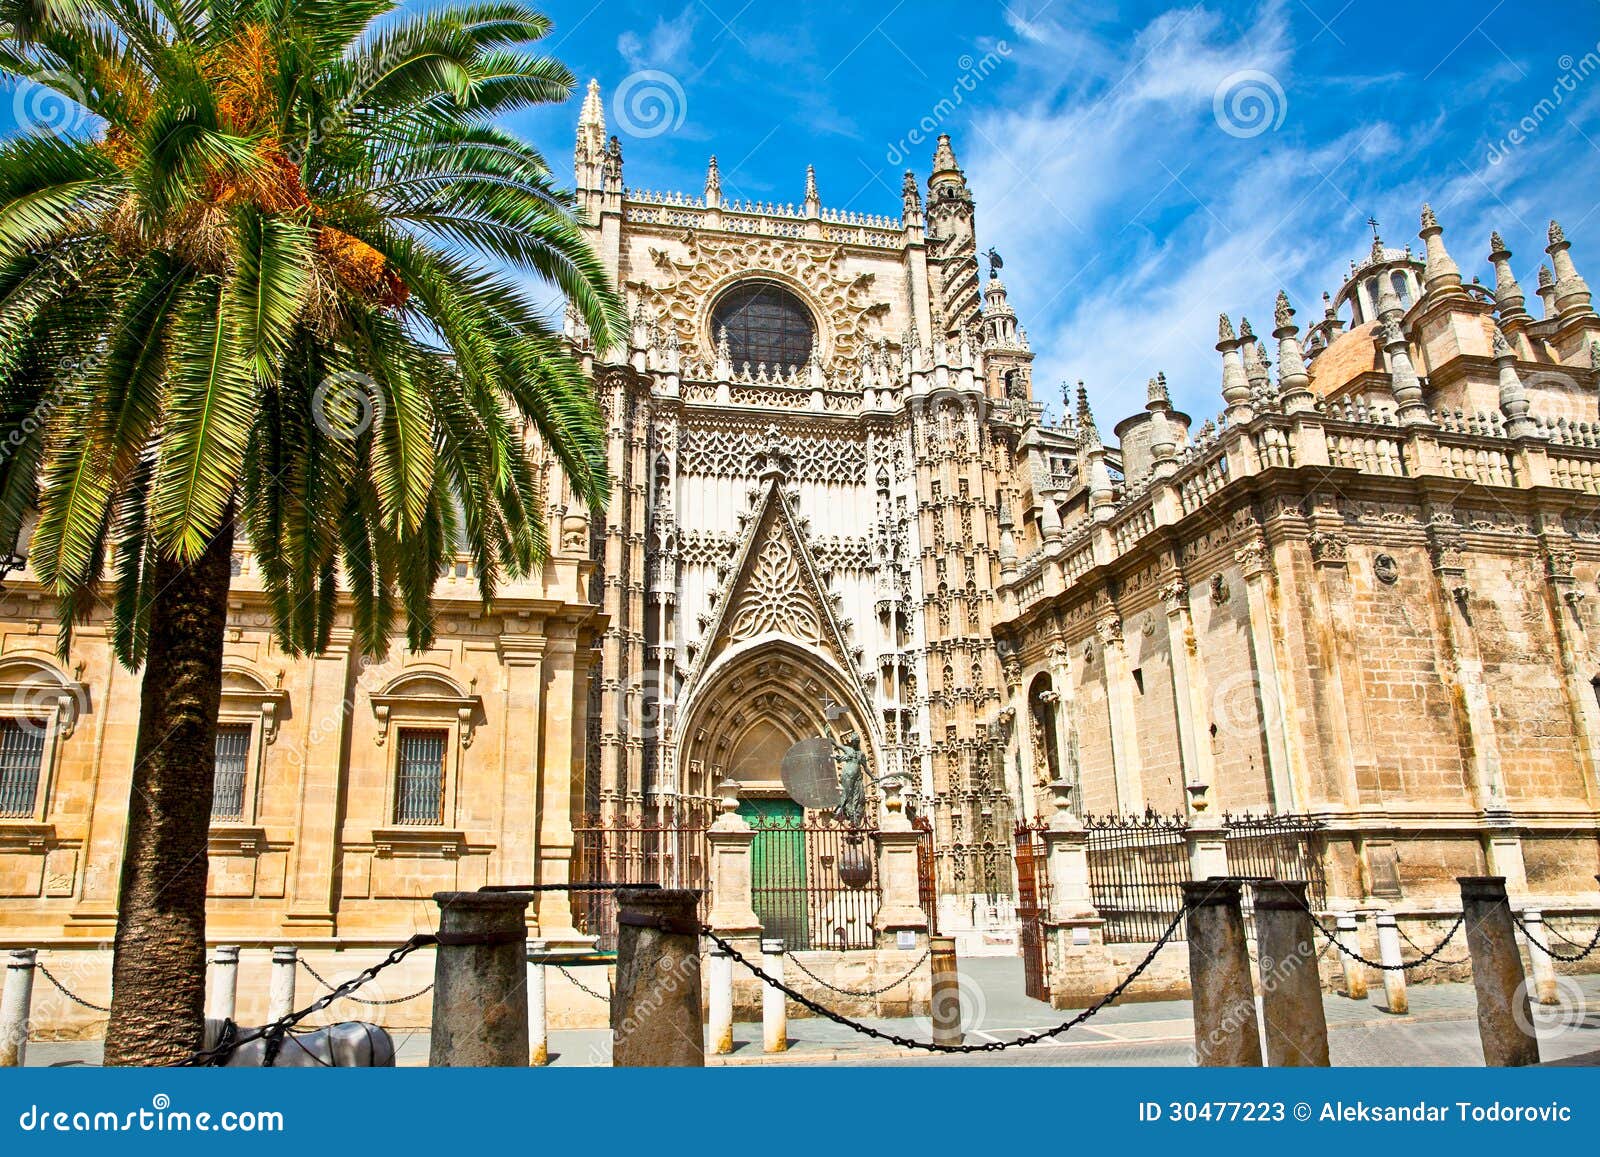 cathedral of saint mary in seville, spain.